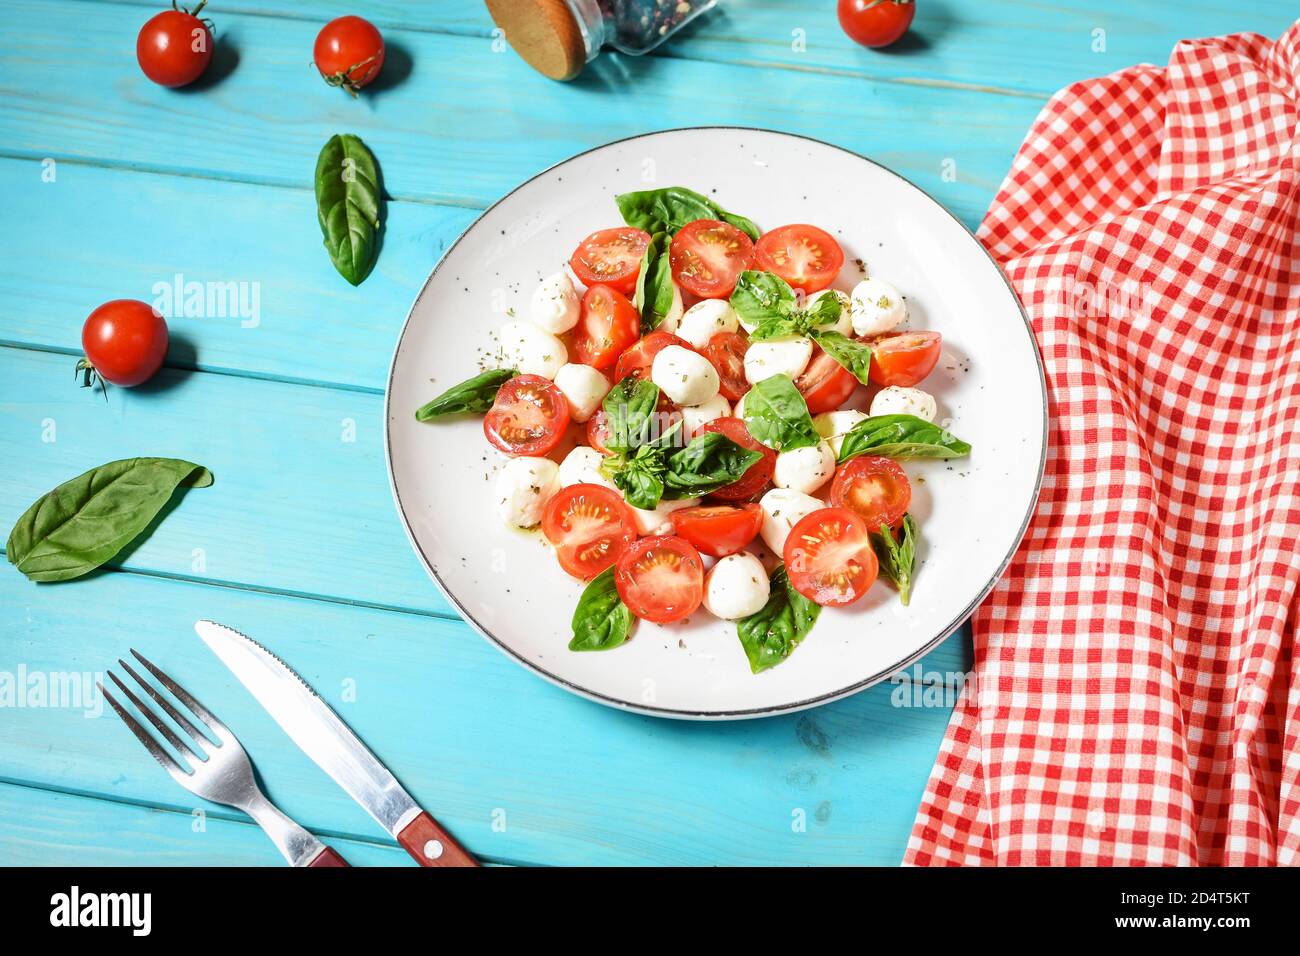 Traditional Italian Caprese Salad - sliced tomatoes, mozzarella cheese and basil on blue wooden background. Stock Photo